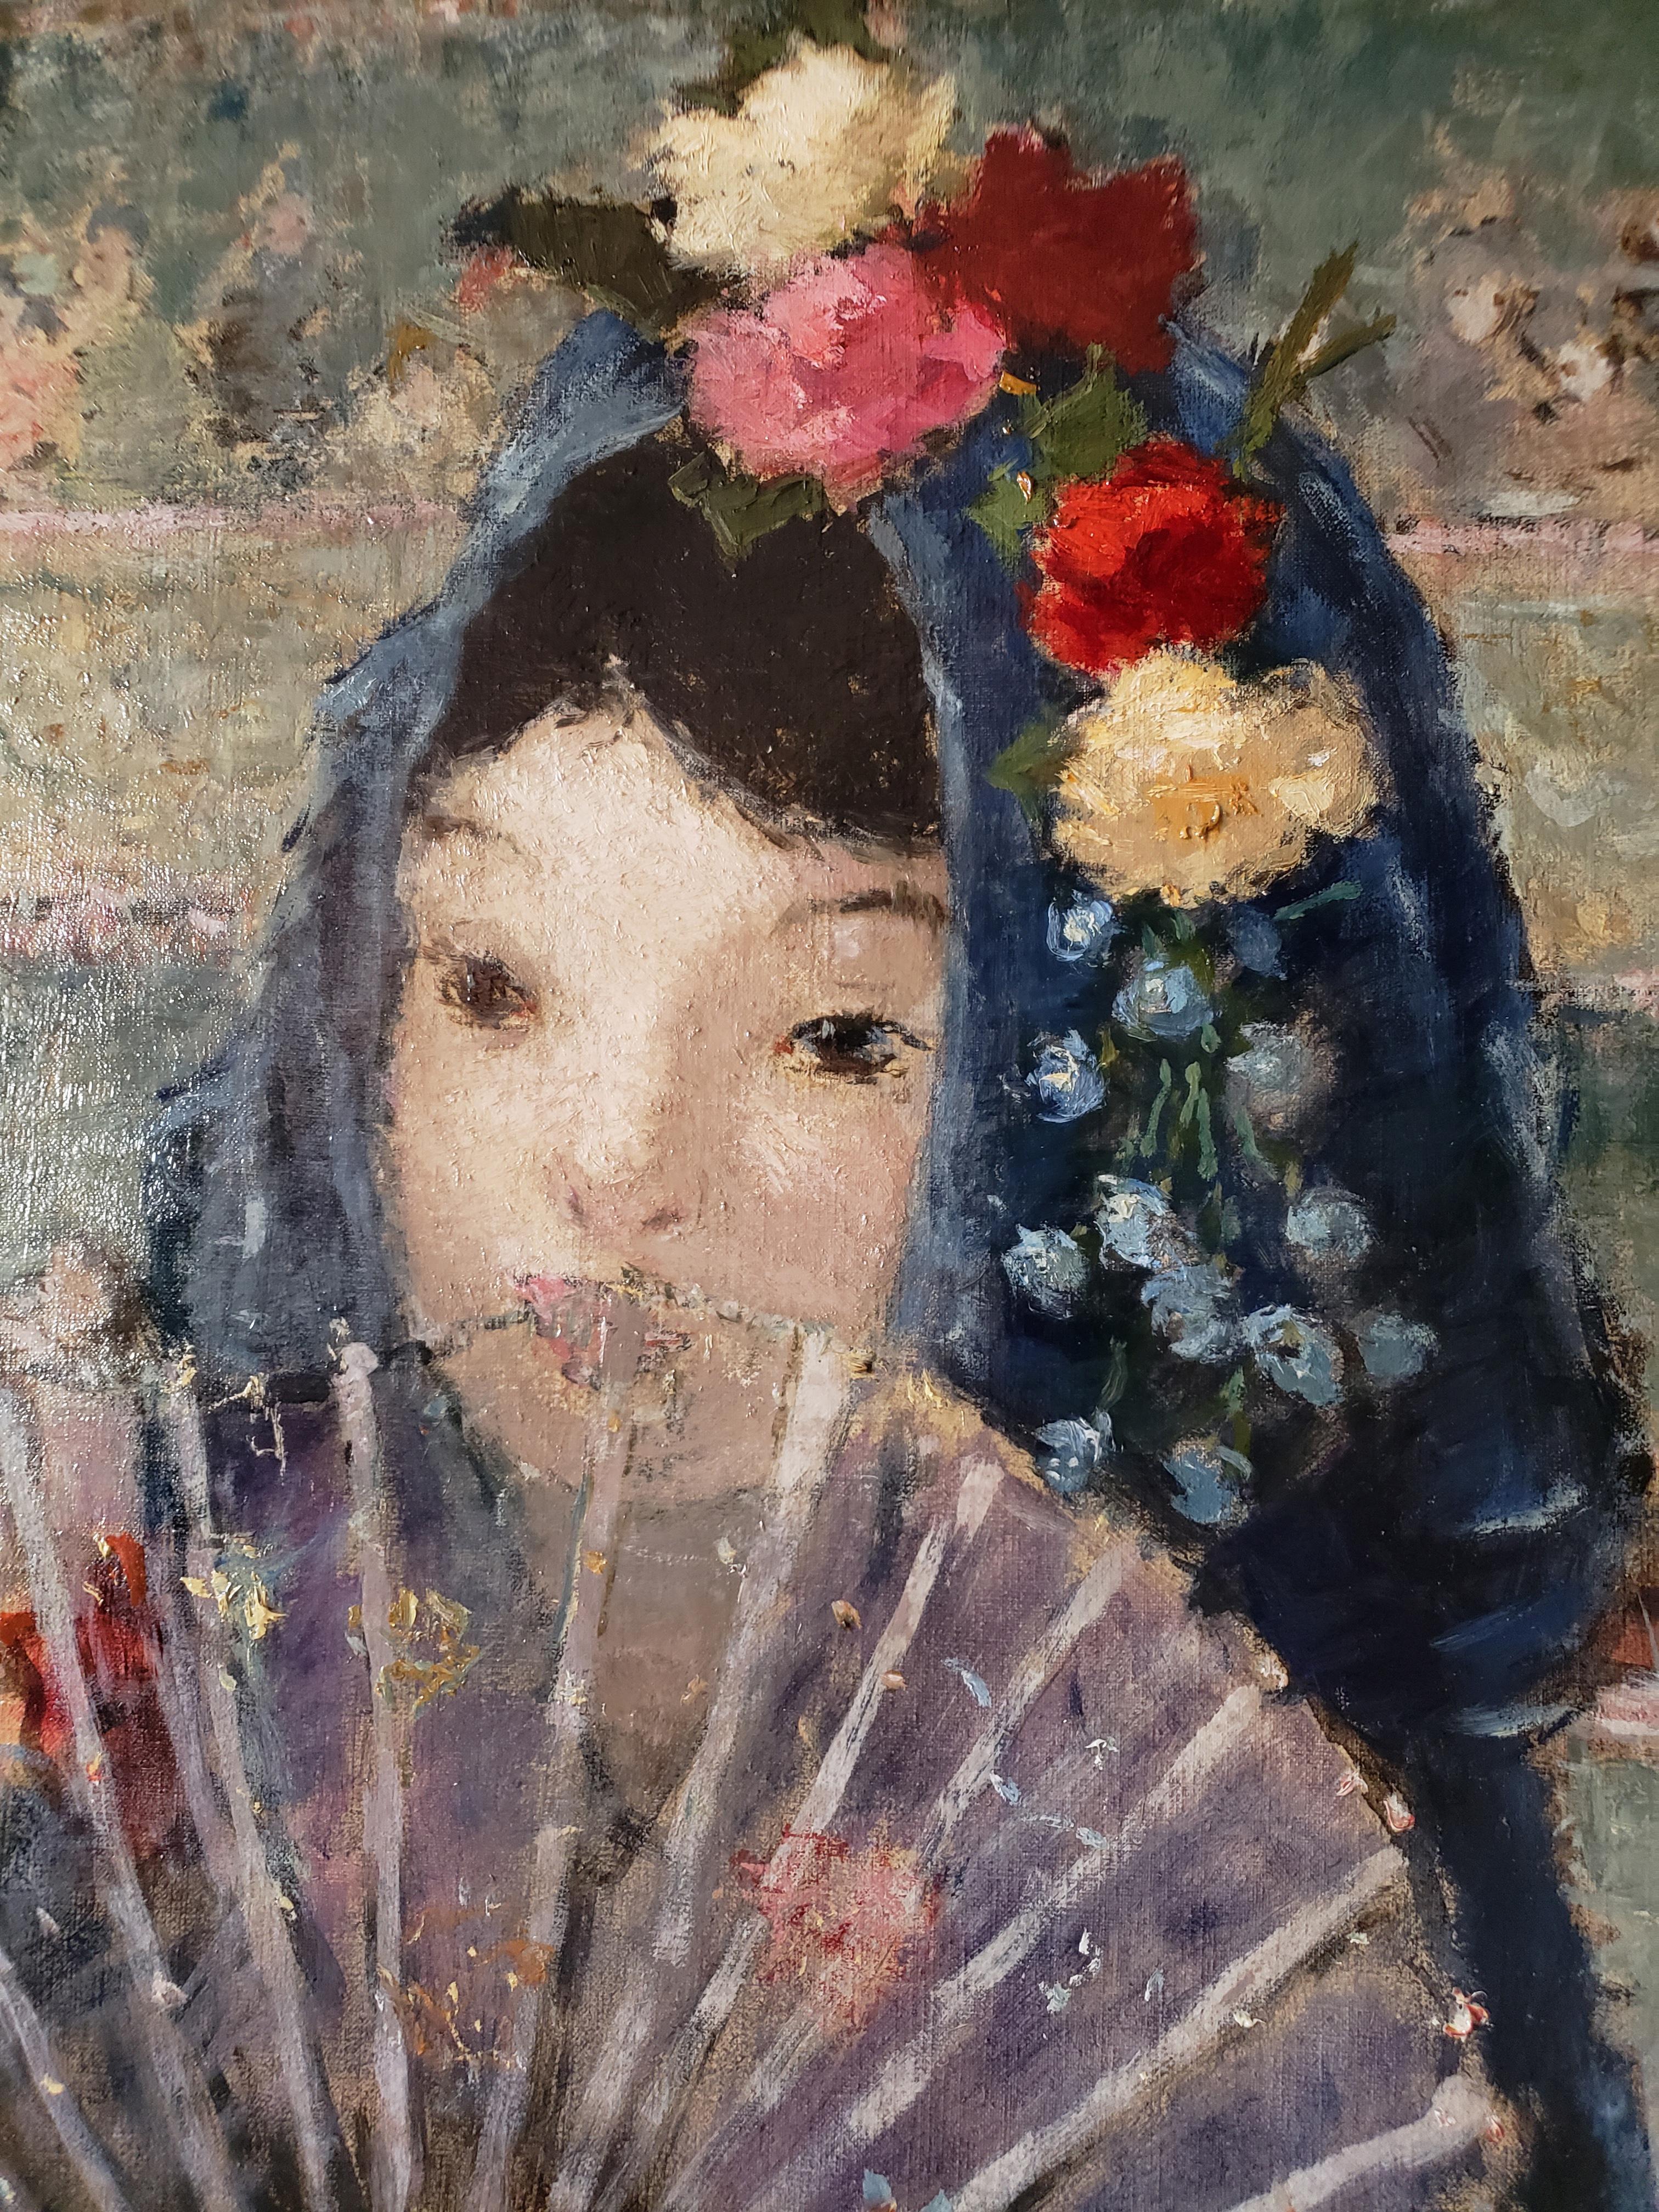 Au Bal Masque - Spanish girl at Opera - This spectacularly beautiful post-impressionist portrait t could be reminiscent of Degas. 
A charming girl with a blue mantilla adorned with roses, a blue shawl and a see-through fan that enhances the sitter's